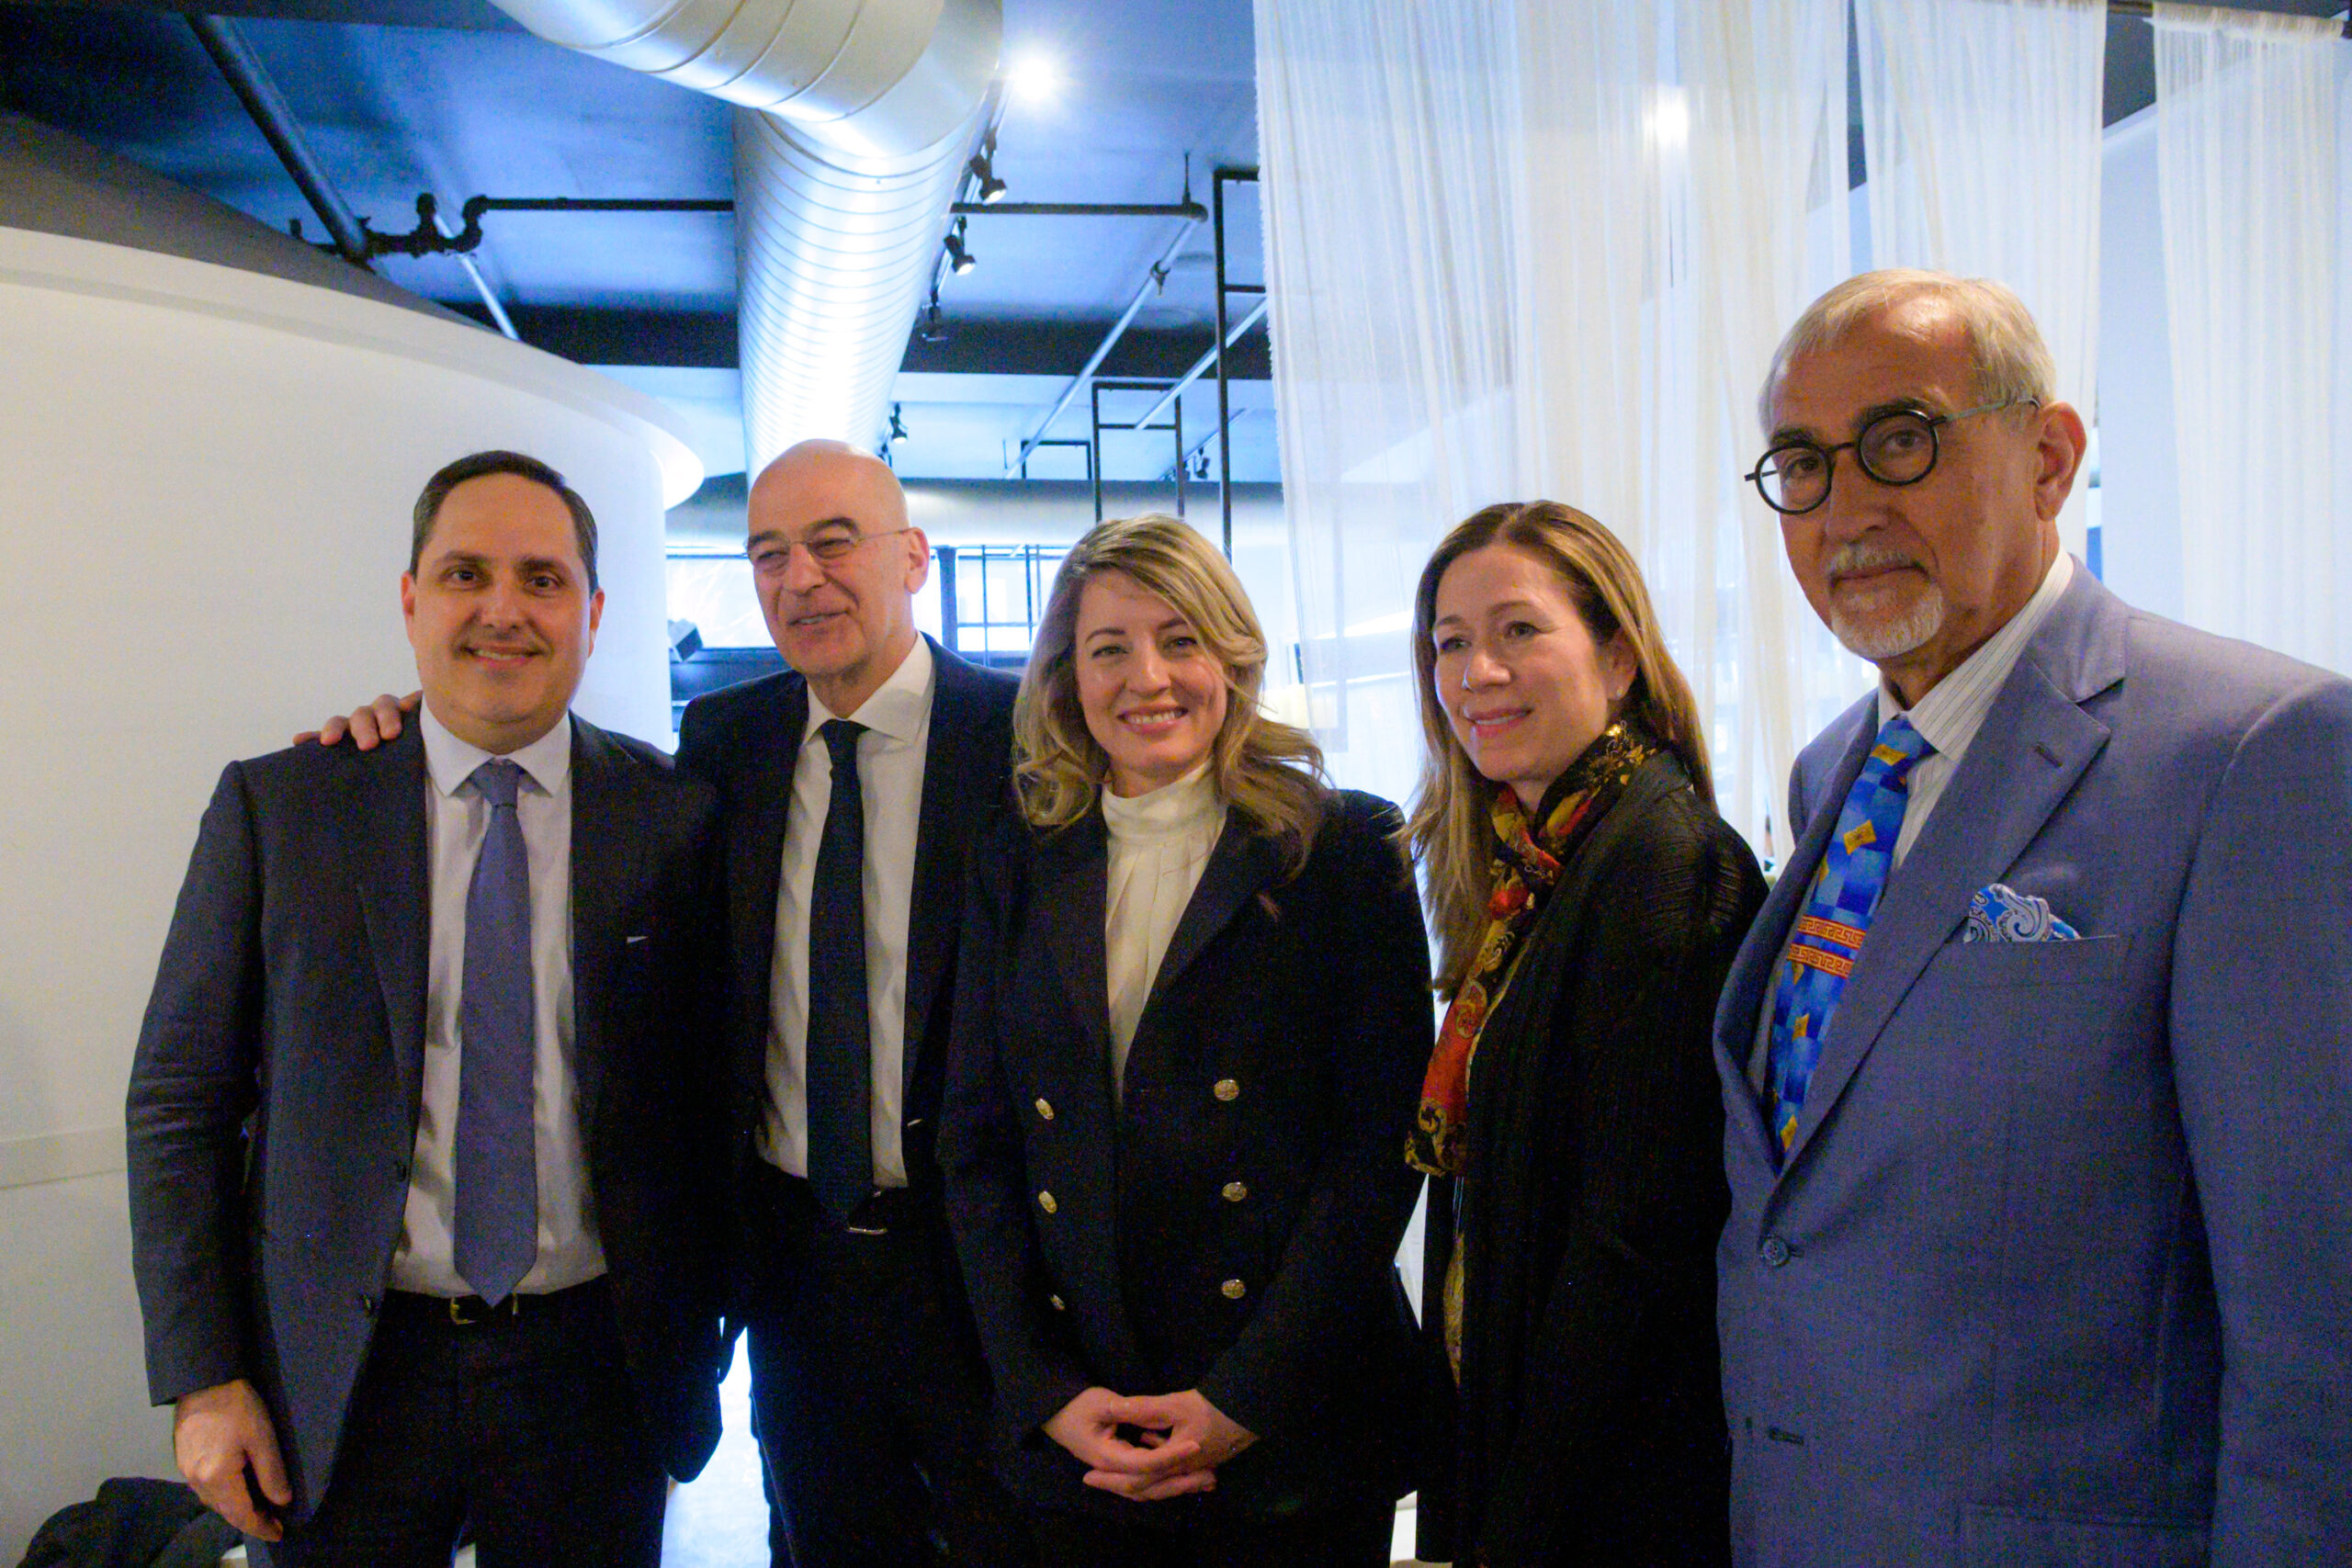 THI Canada Co-Hosts Minister Dendias and Minister Joly in Canada